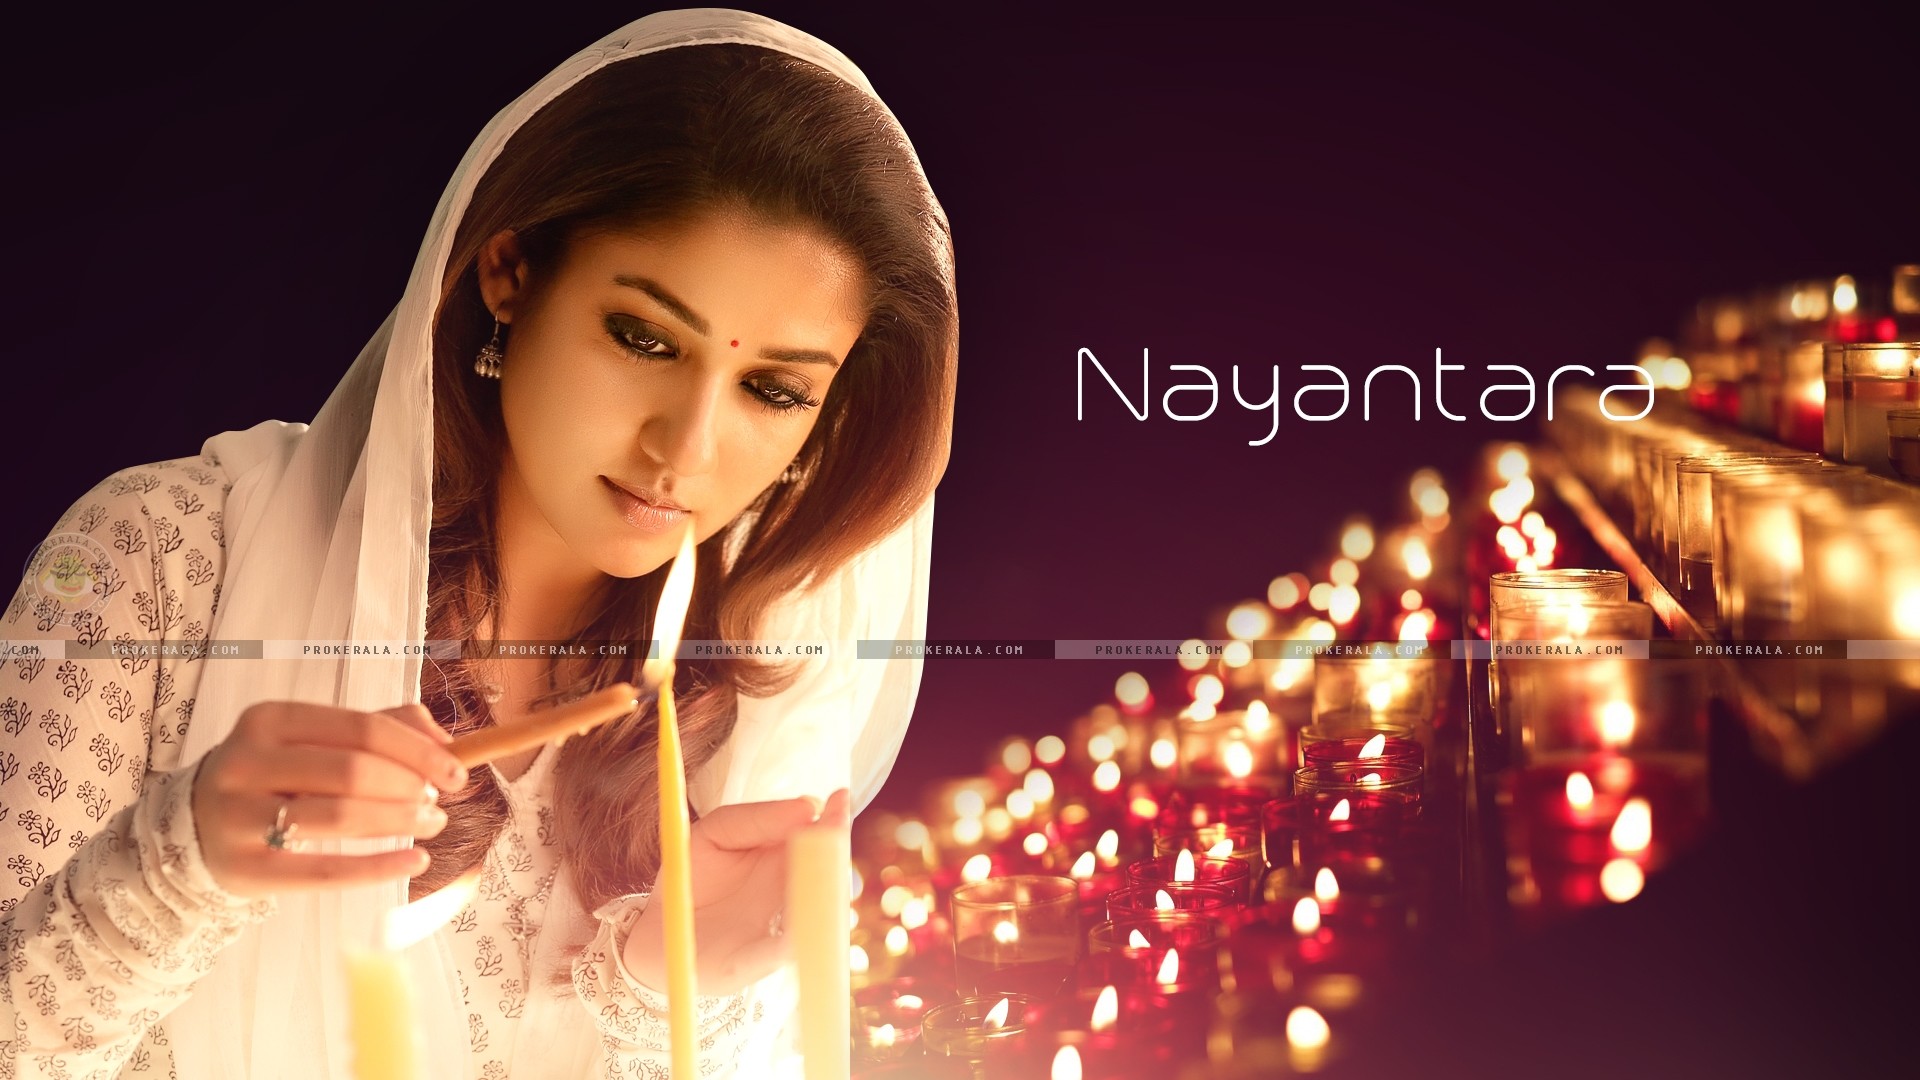 1920x1080 Nayanthara Wallpapers High Resolution and Quality Download 1920Ã1080